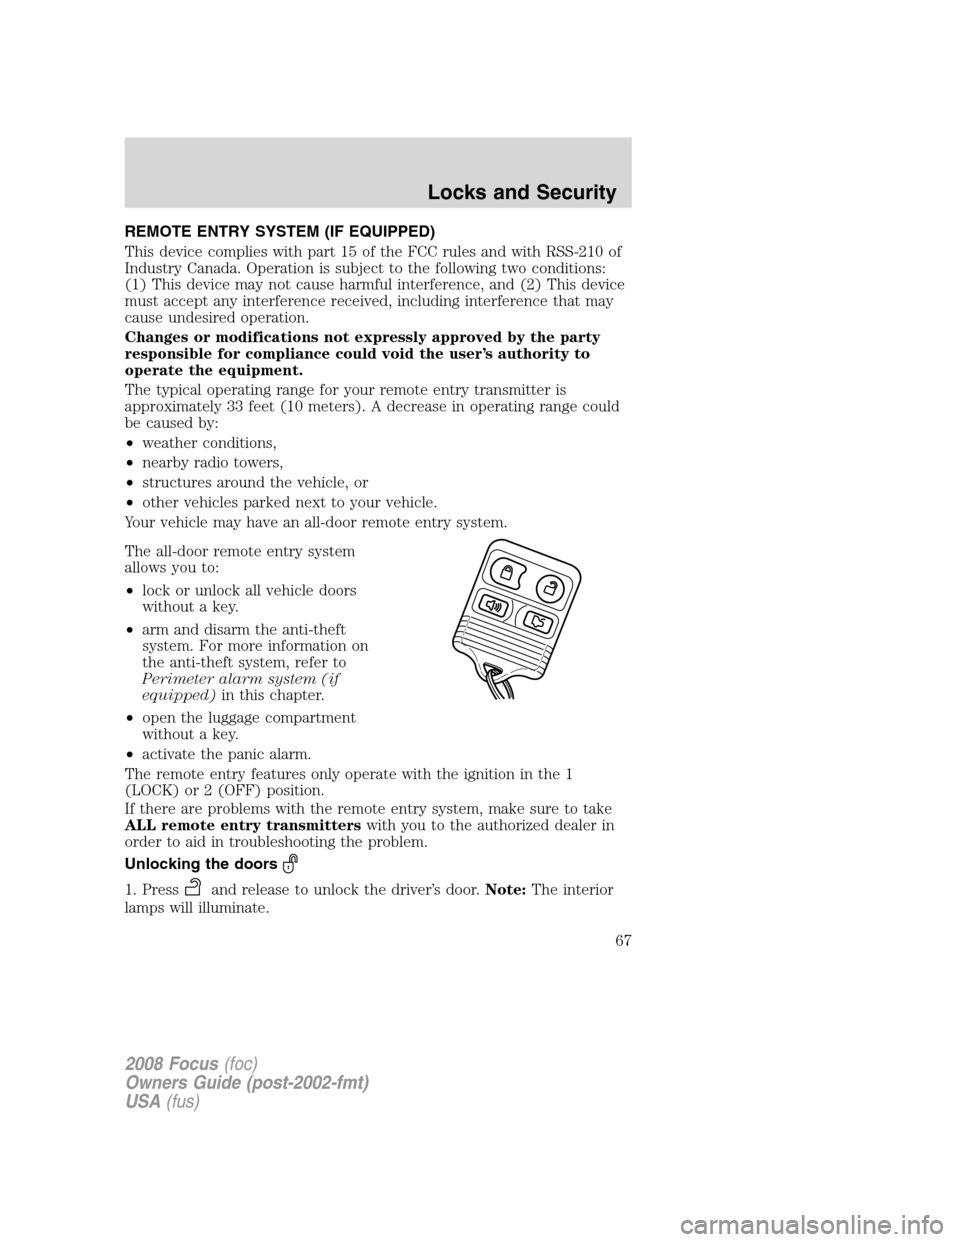 FORD FOCUS 2008 2.G Owners Manual REMOTE ENTRY SYSTEM (IF EQUIPPED)
This device complies with part 15 of the FCC rules and with RSS-210 of
Industry Canada. Operation is subject to the following two conditions:
(1) This device may not 